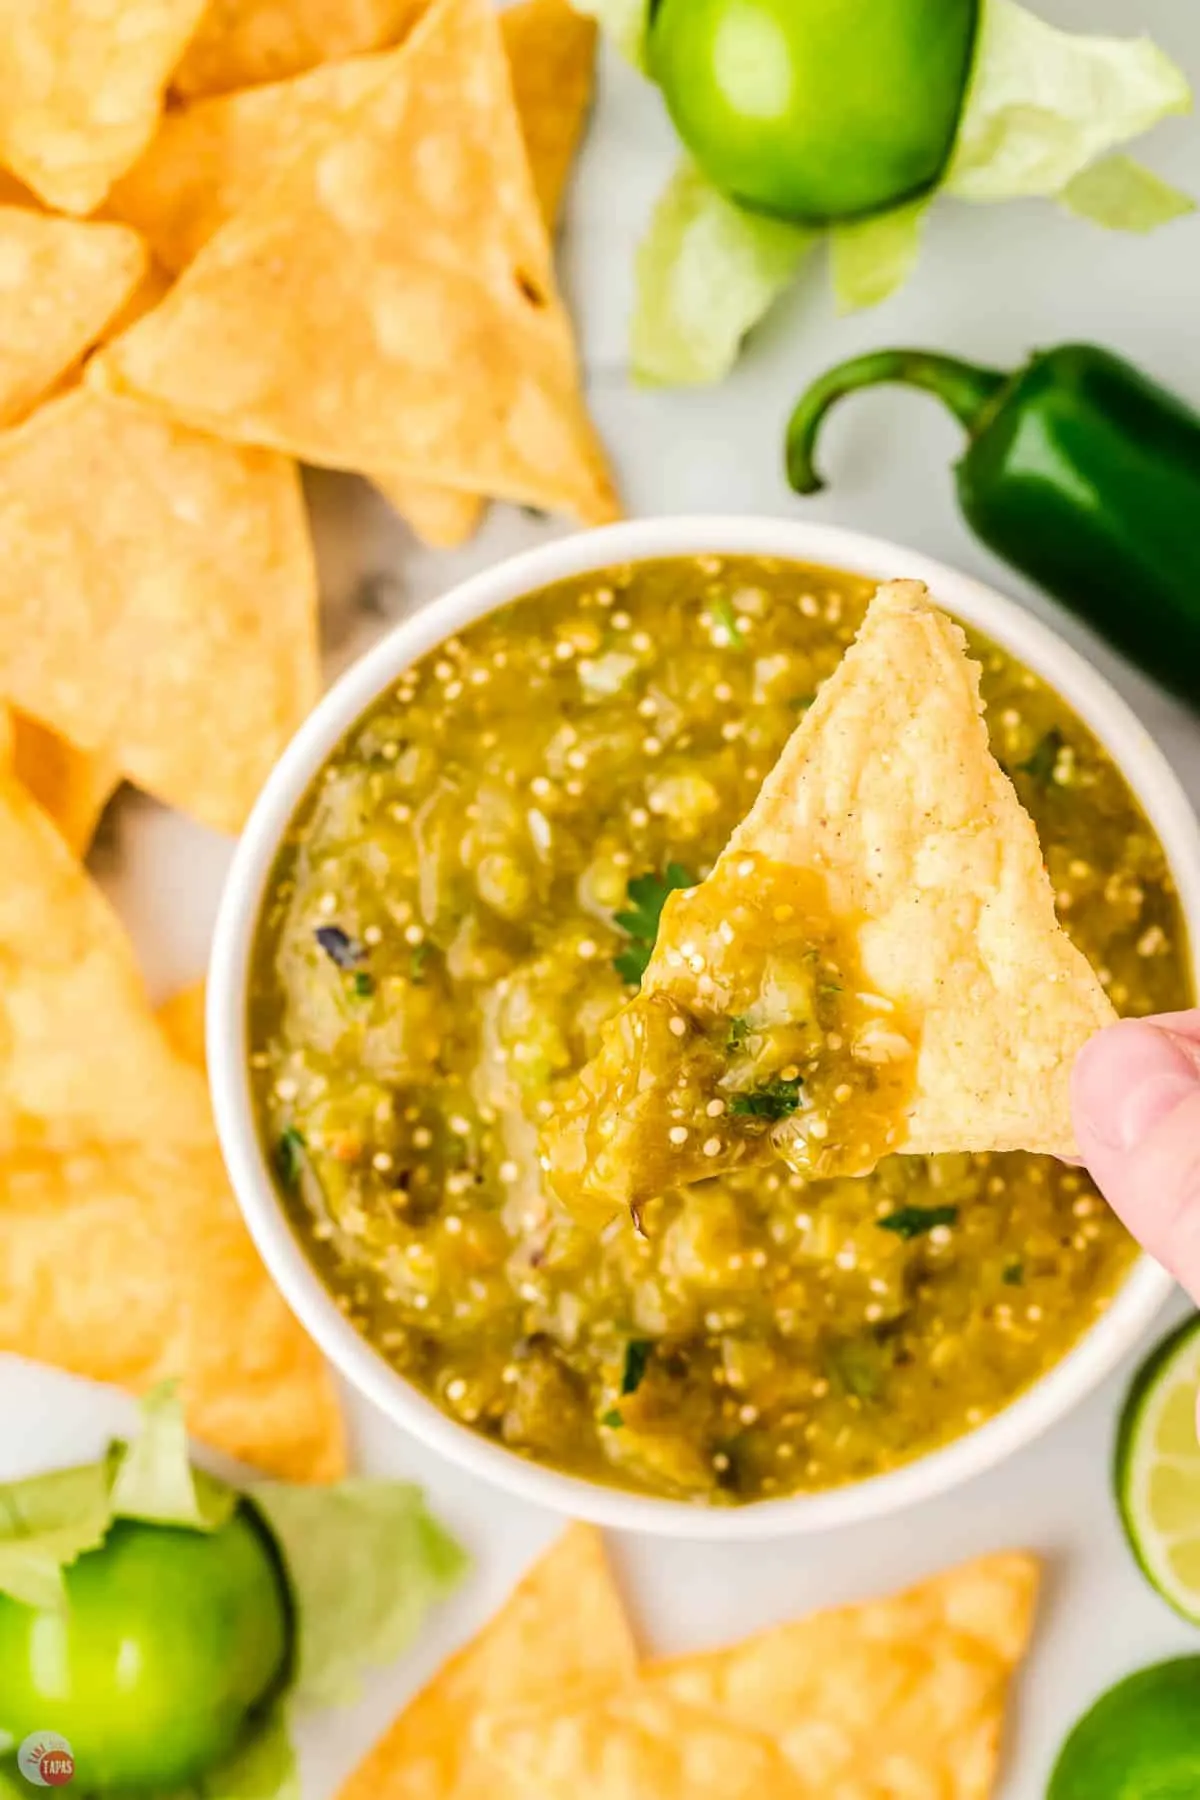 salsa verde is one of my fave suthentic mexican recipes